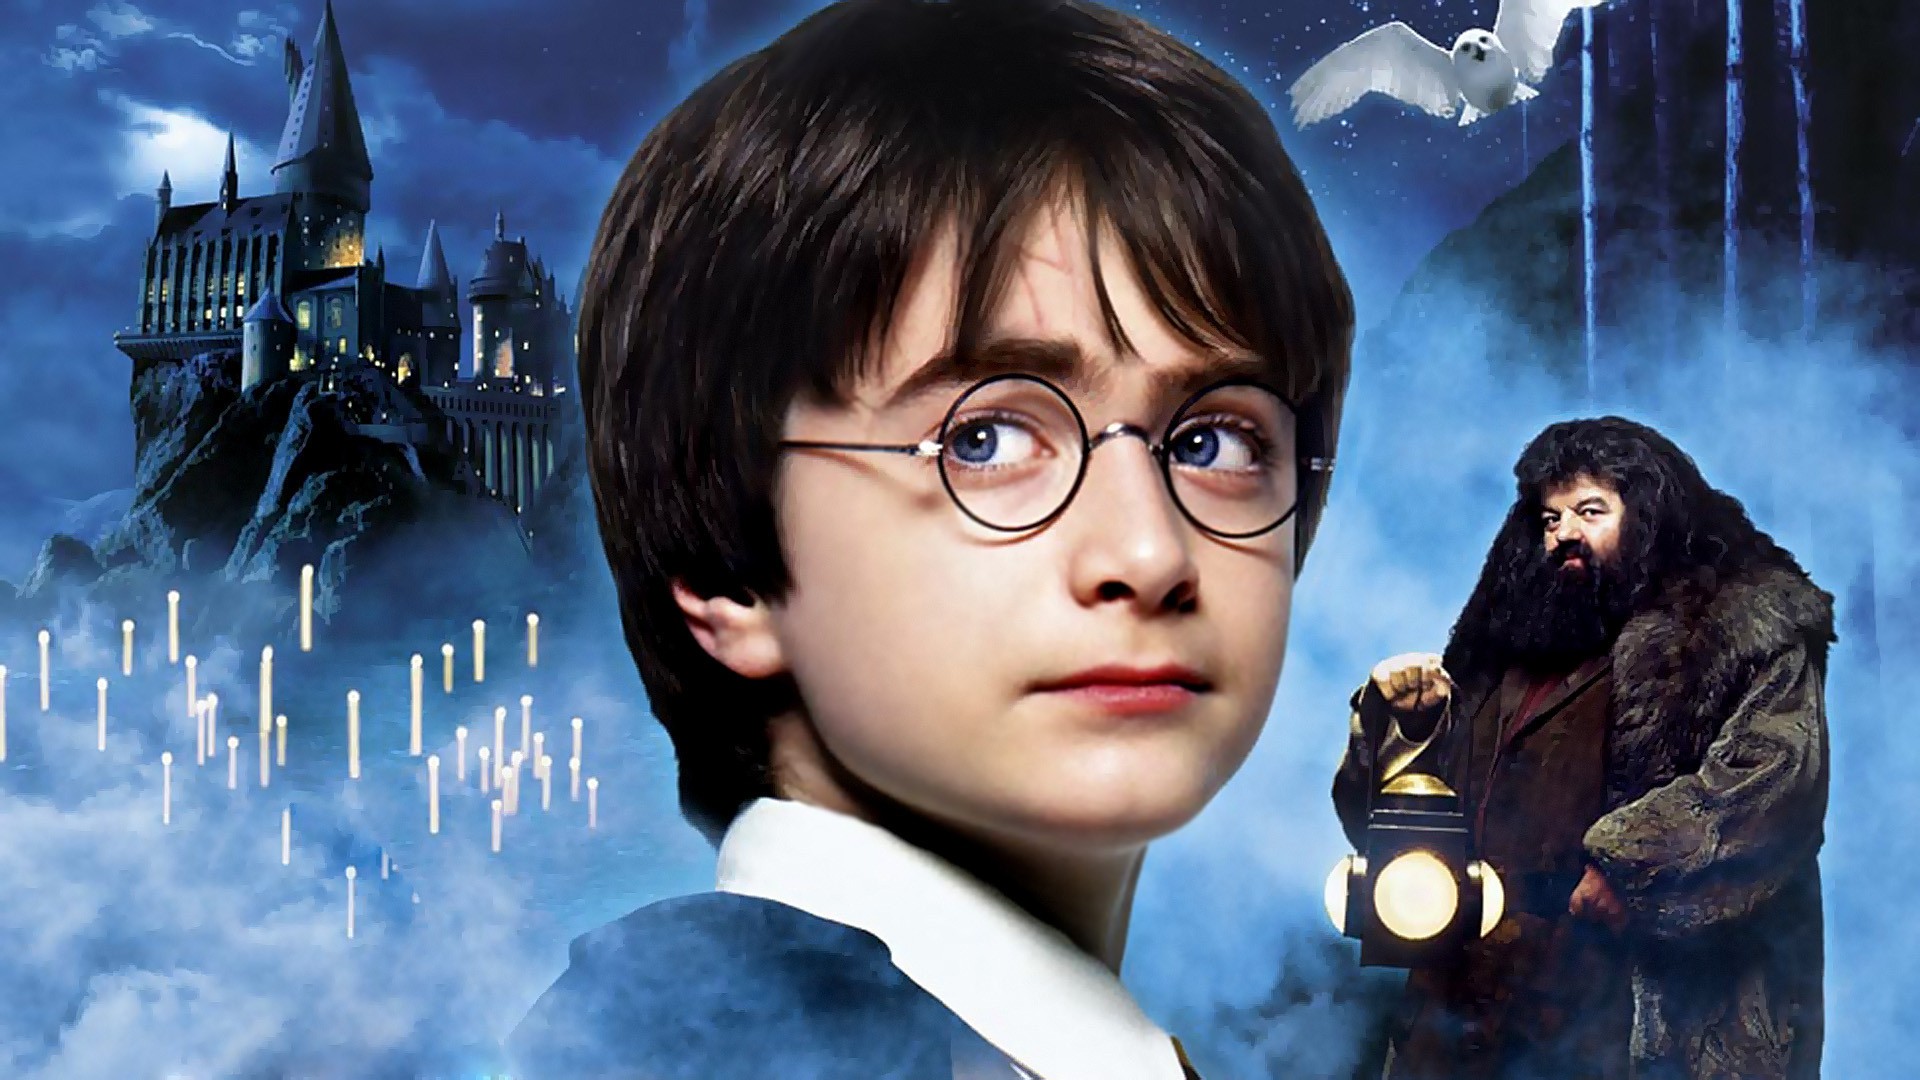 People 1920x1080 Harry Potter Hogwarts lantern castle candles Daniel Radcliffe movies Harry Potter and the Sorcerer's Stone Rubeus Hagrid